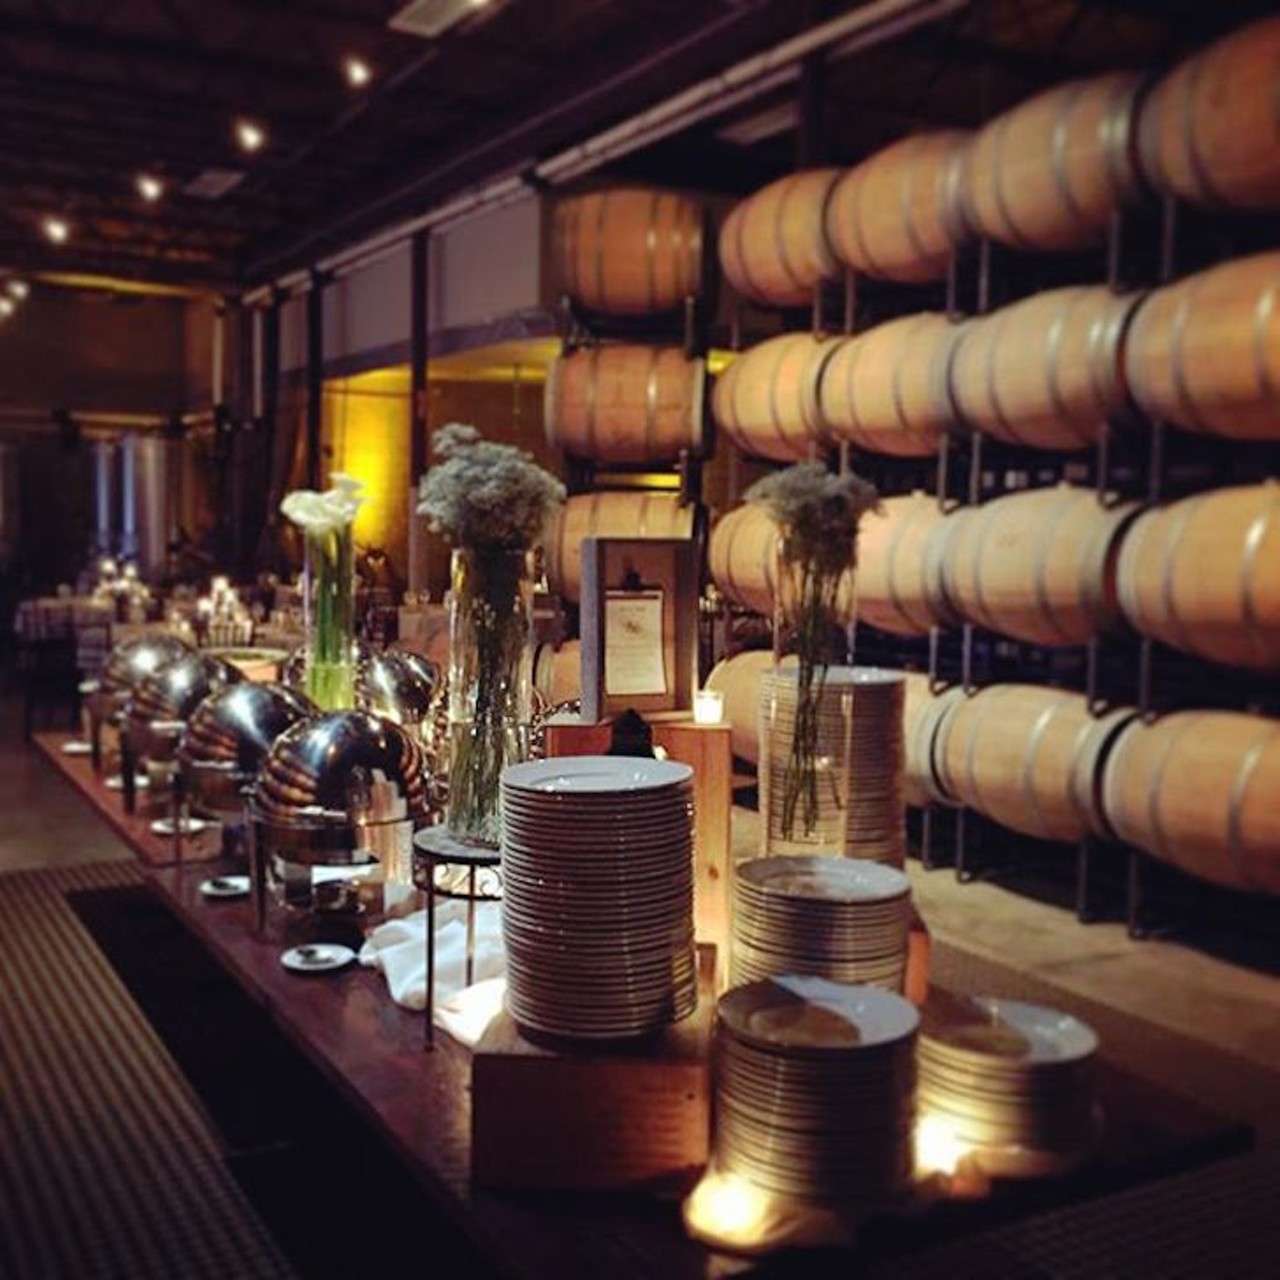 Quantum Leap Winery
Hosting a wedding in a winery? You already know who you are.
1312 Wilfred Drive | 407-730-3082
Photo via cuisiniers/Instagram